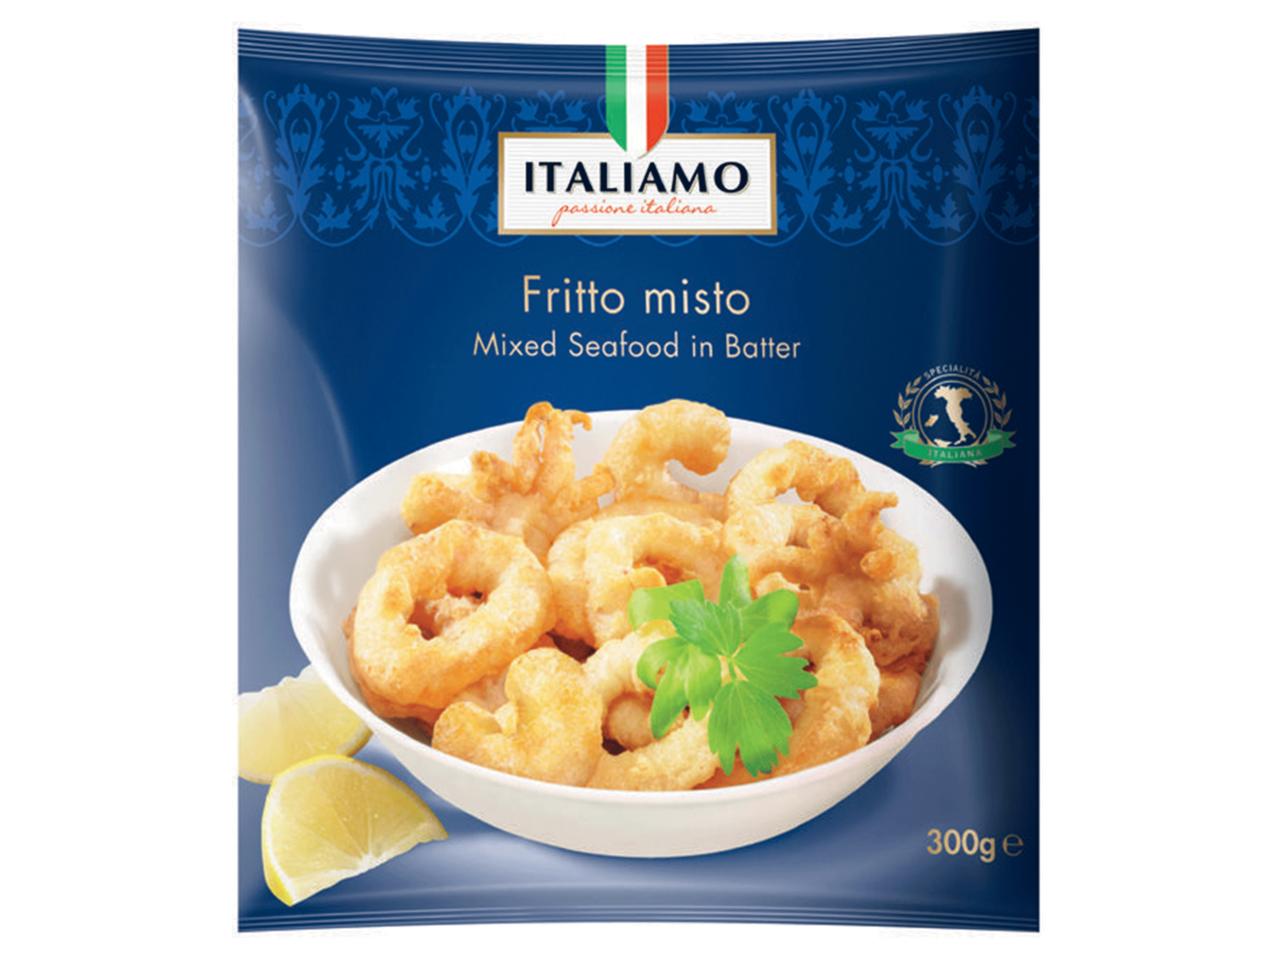 ITALIAMO Mixed Seafood in Batter